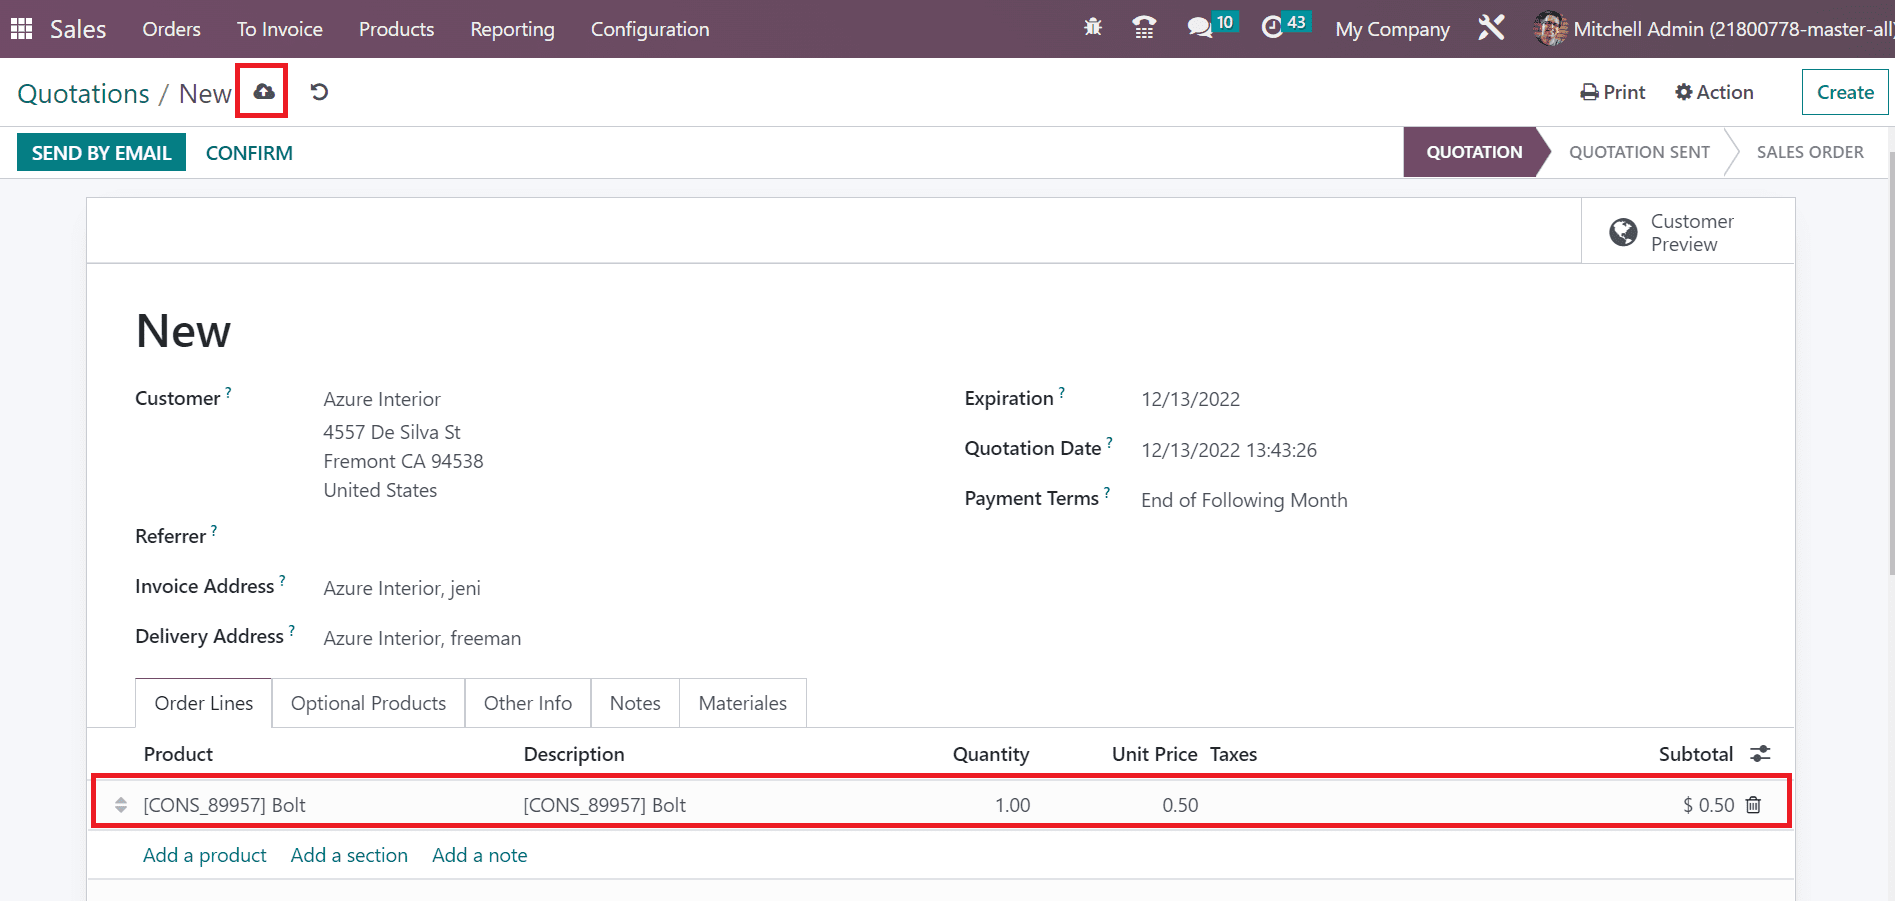 how-to-create-an-invoice-from-odoo-16-sales-quotation-send-product-information-7-cybrosys